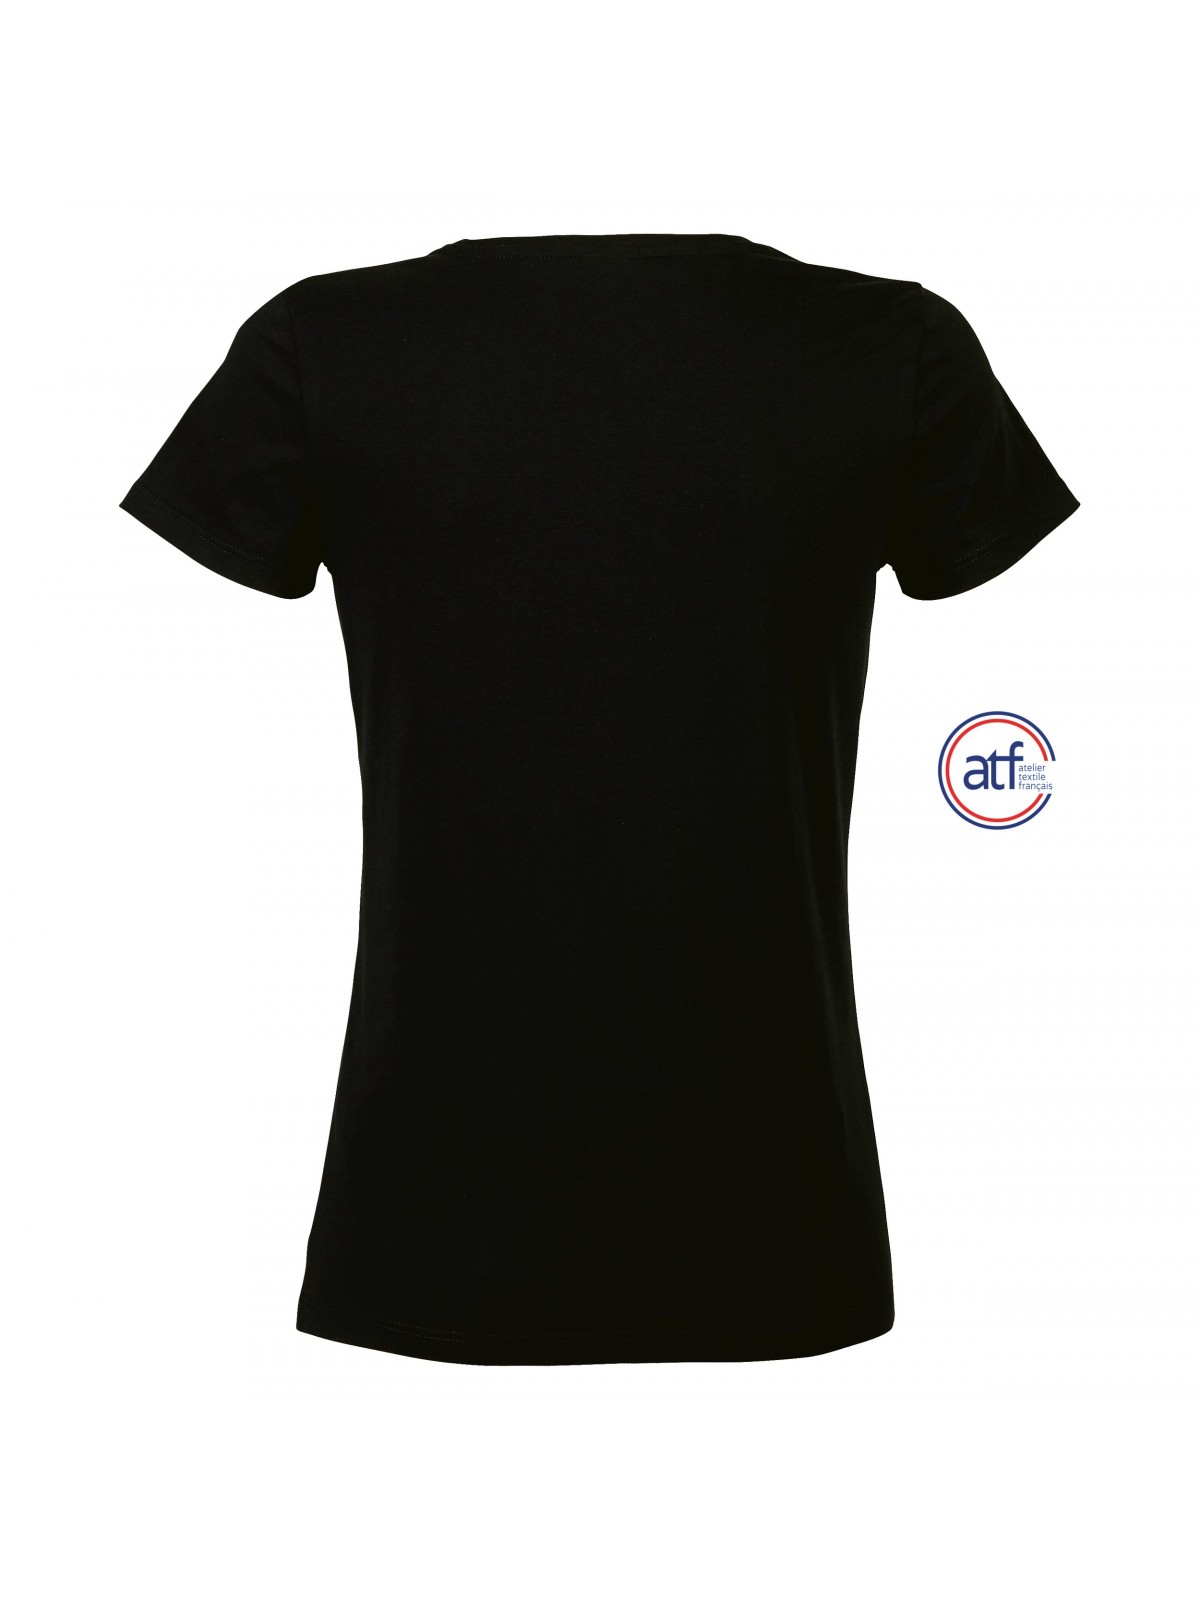 26-852 Tee-shirt femme col rond MADE IN FRANCE personnalisé